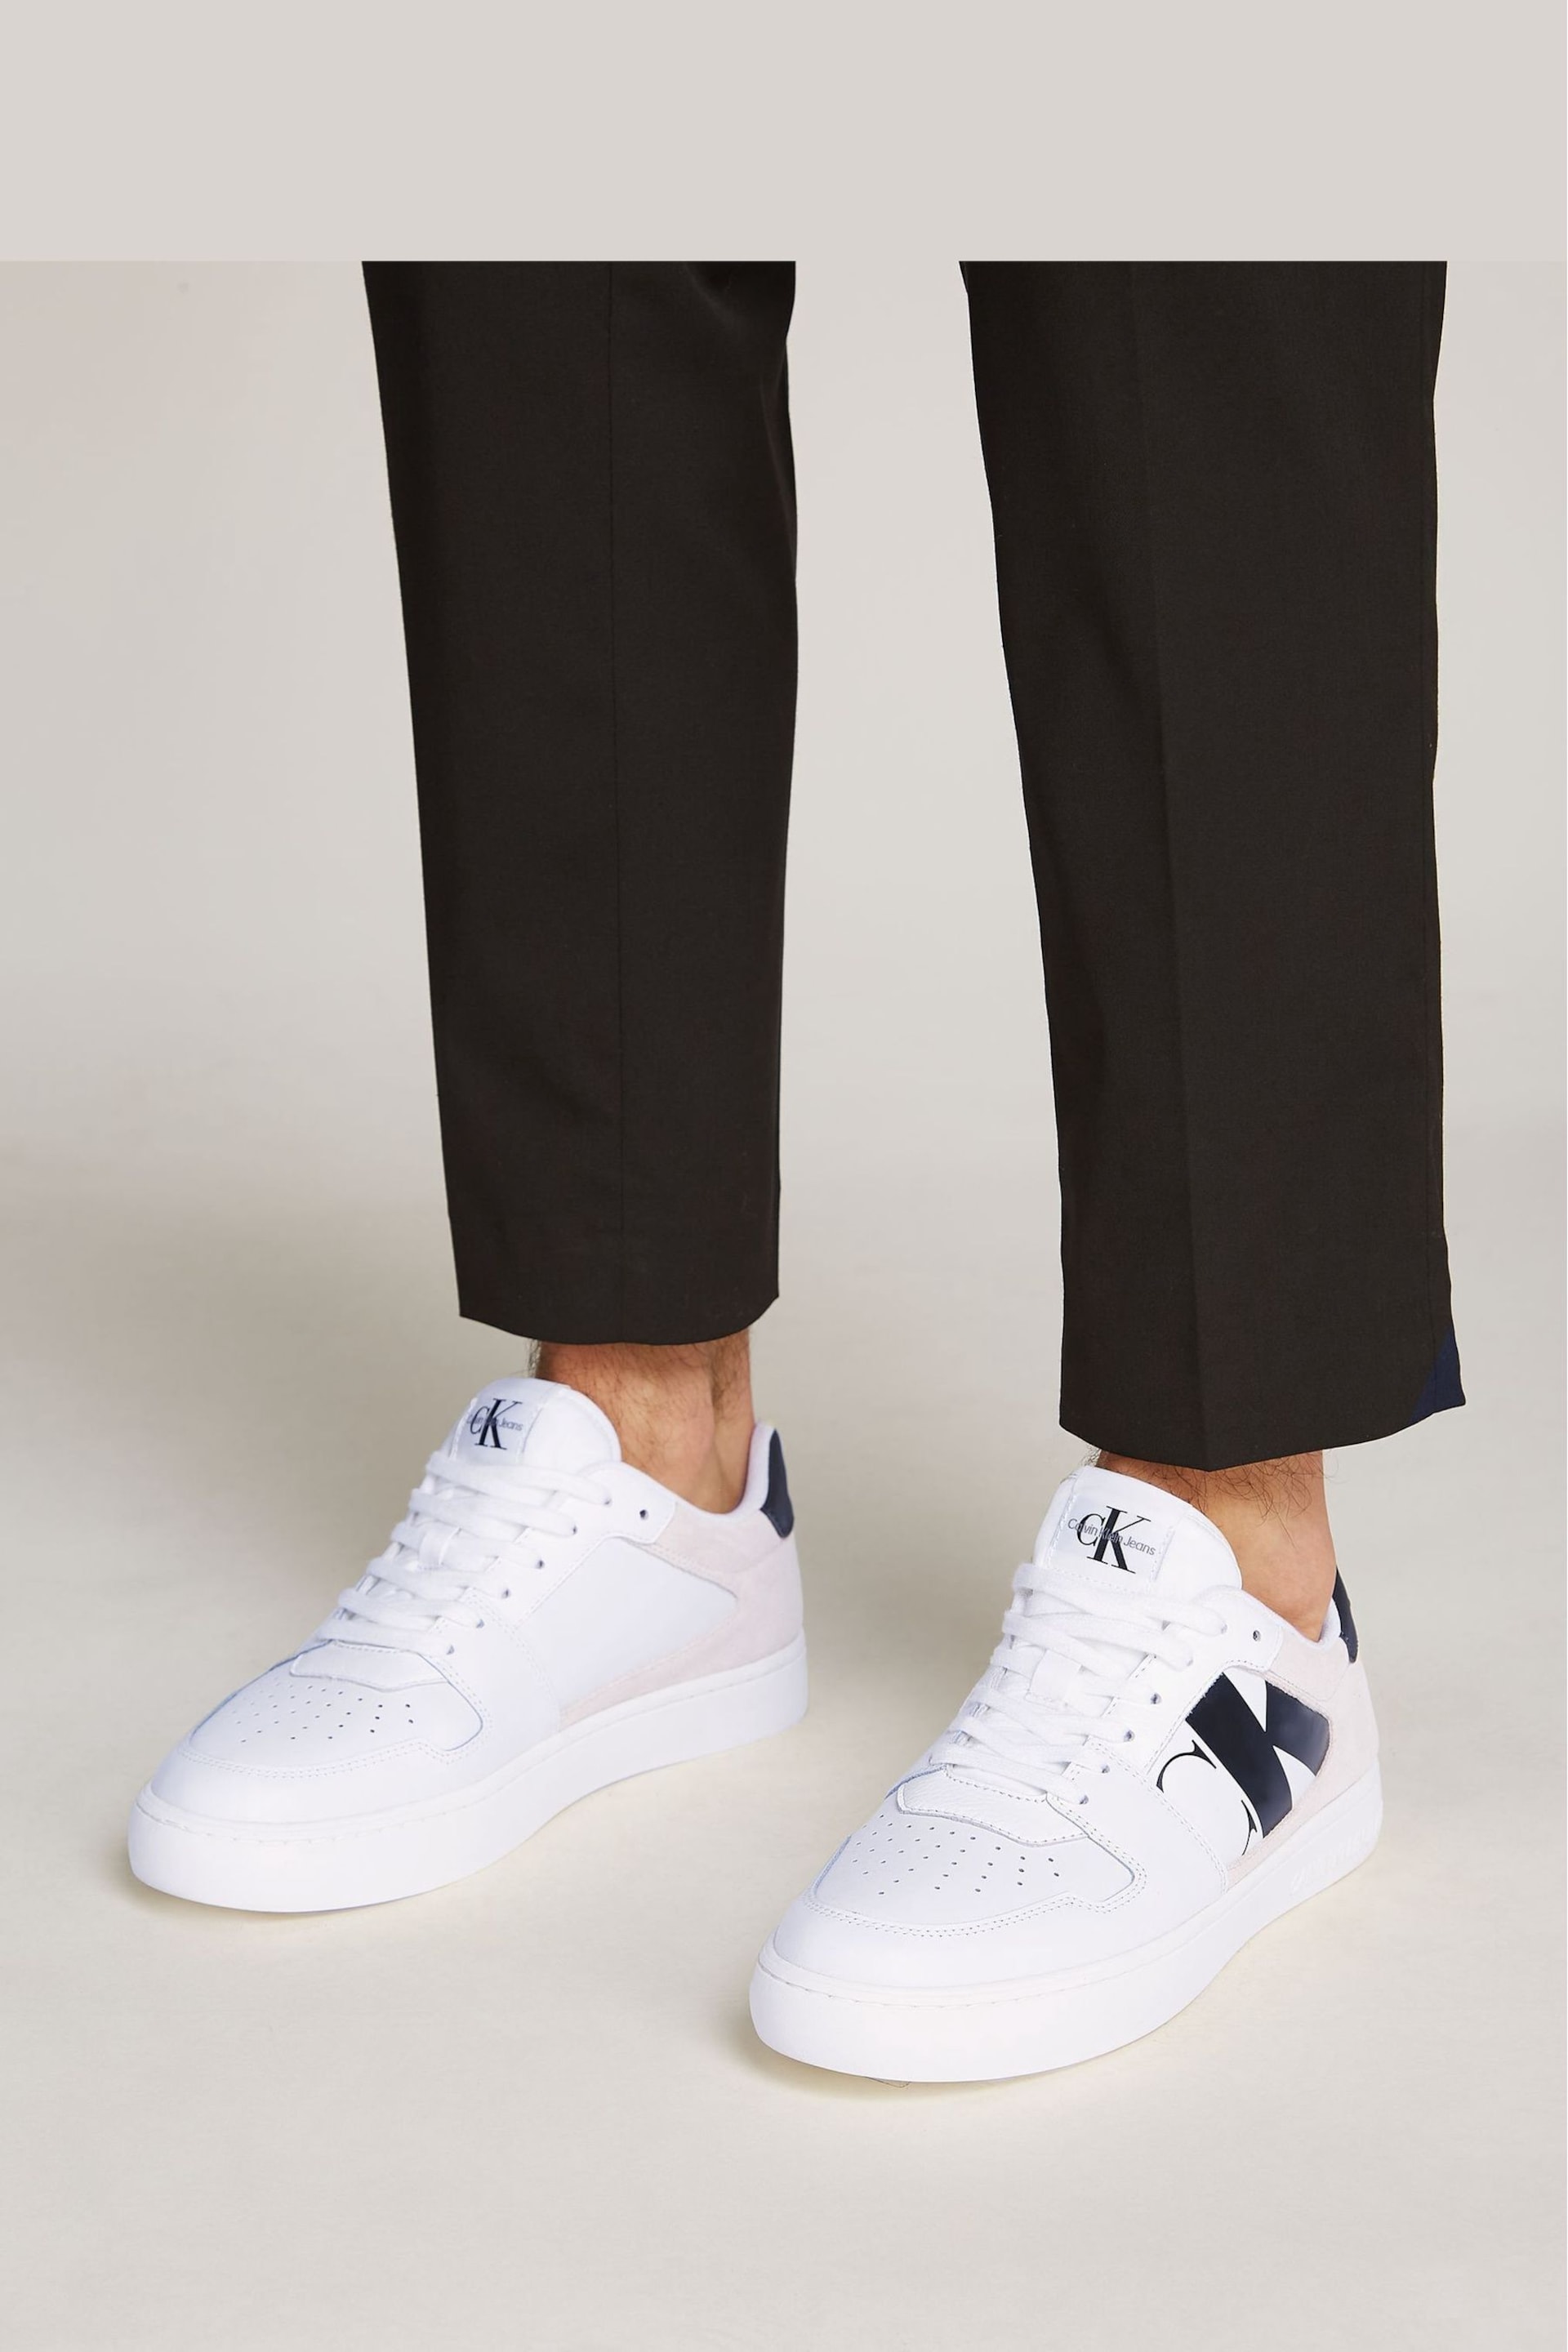 Calvin Klein White Classic Cupsole Low Lace-Up Trainers - Image 4 of 4